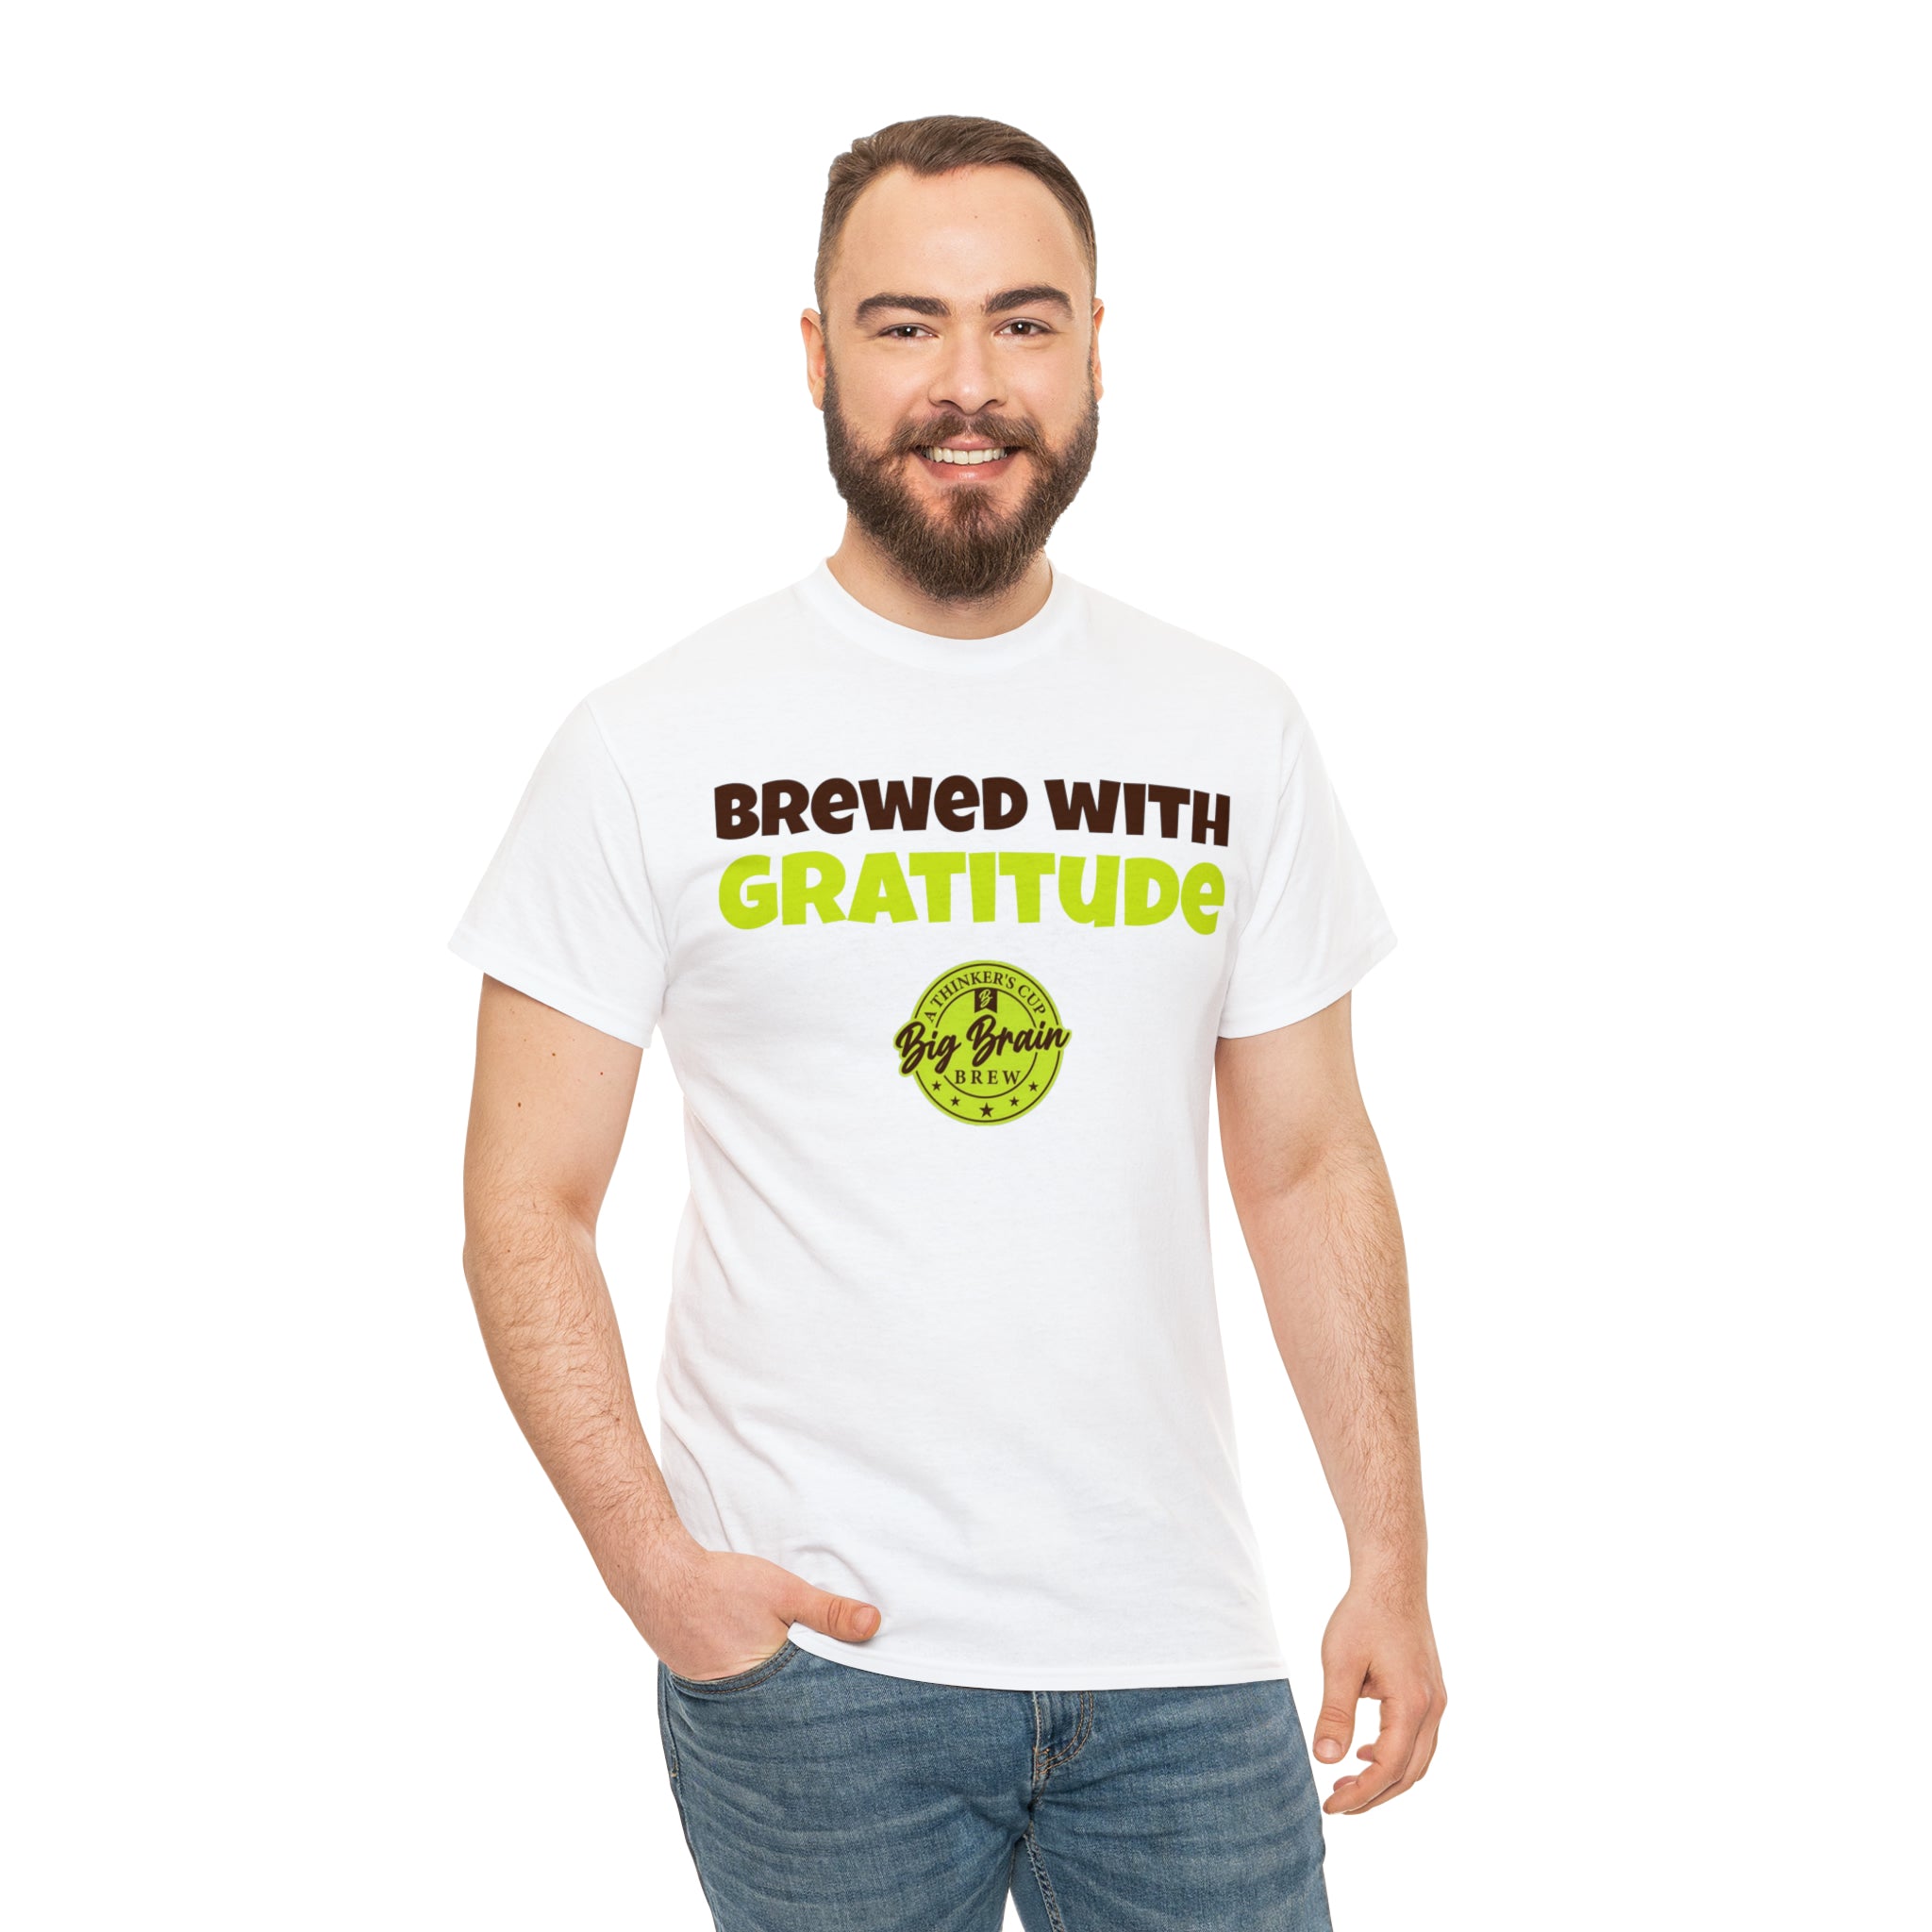 Brewed with Gratitude T-Shirt Designed by Big Brain Brew